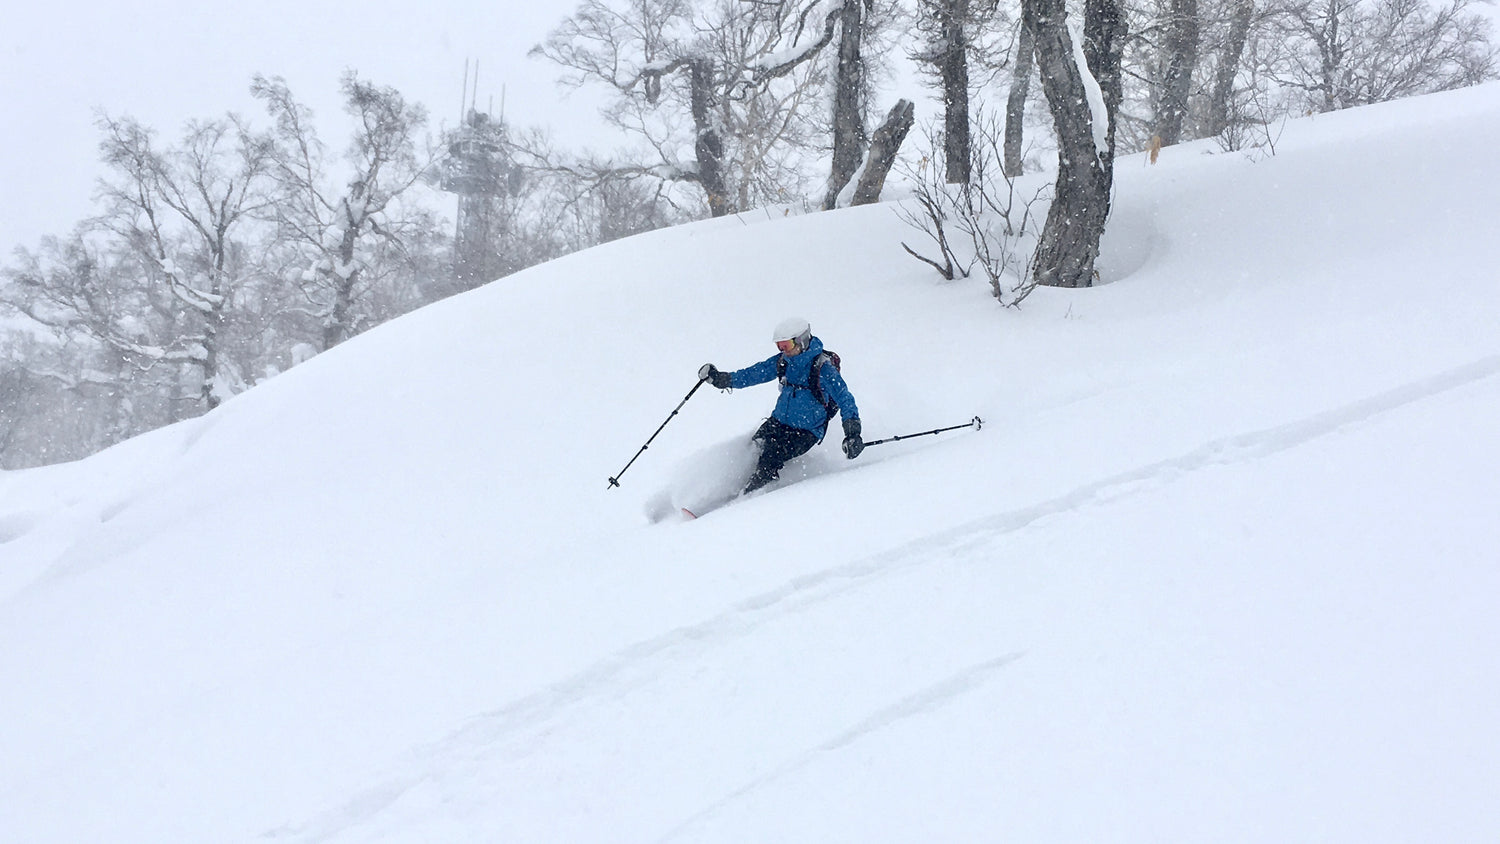 From steeps to cruiser runs Japan has something for everyone. From alpine lines to fun forest runs this skier enjoyed every turn along the way in Furano Hokkaido Japan.